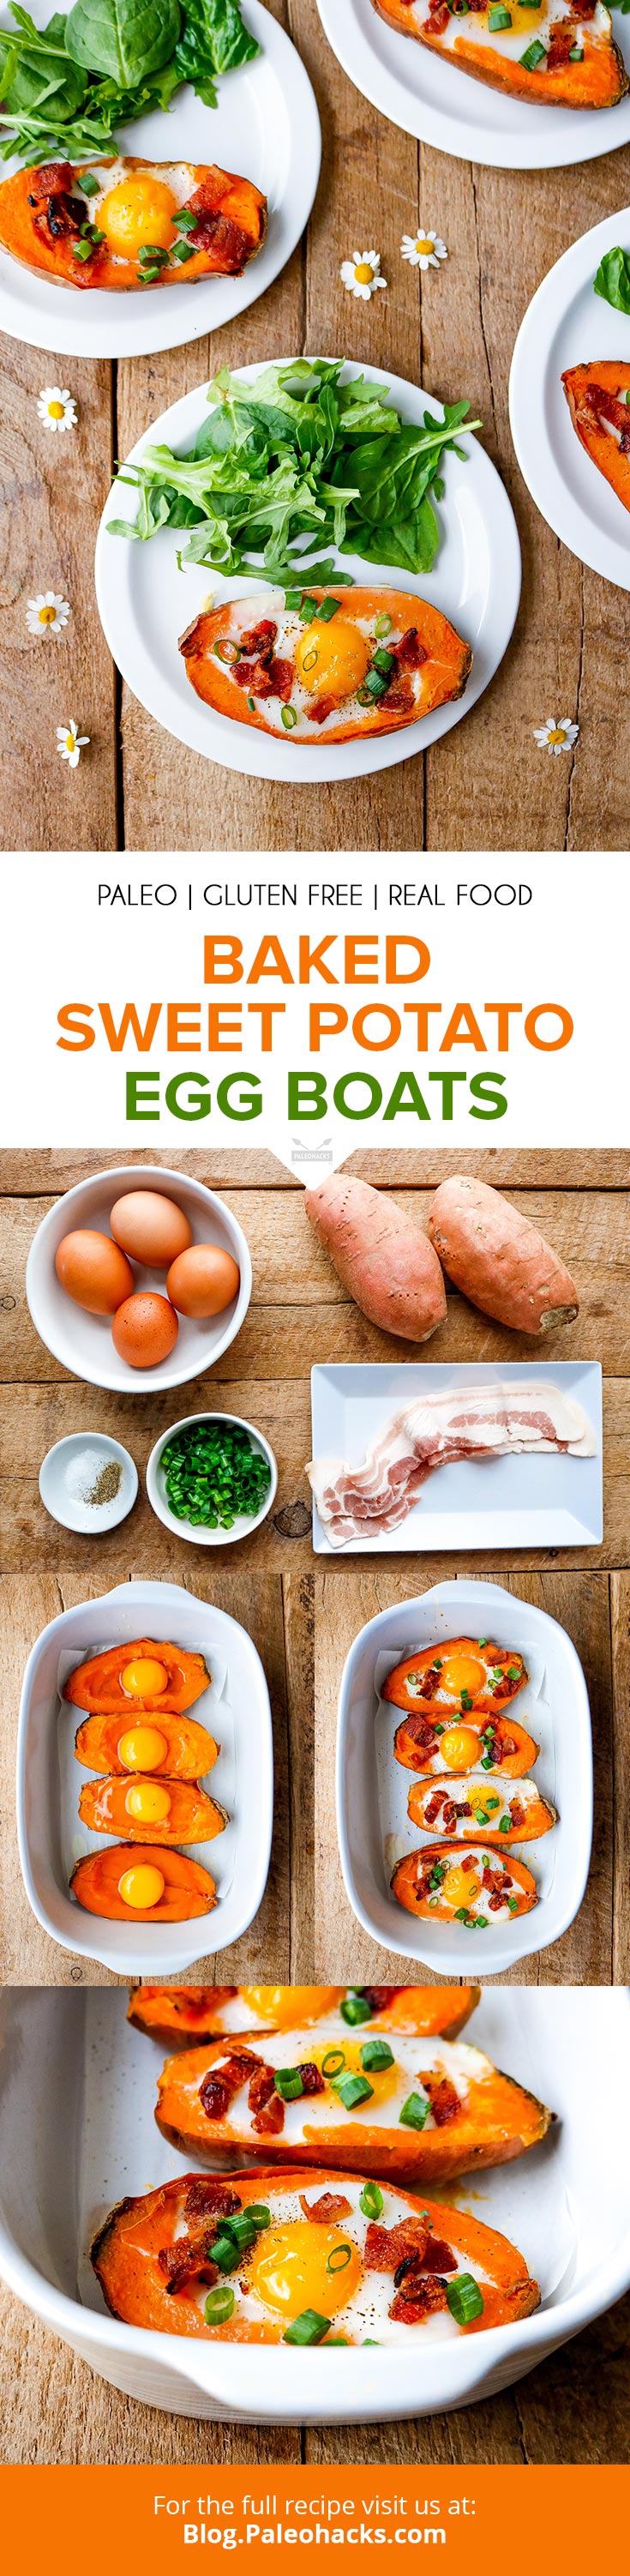 This perfectly-portioned egg boat is full of smoky bacon and beta carotene-rich sweet potatoes, with a dose of protein baked into each potato.